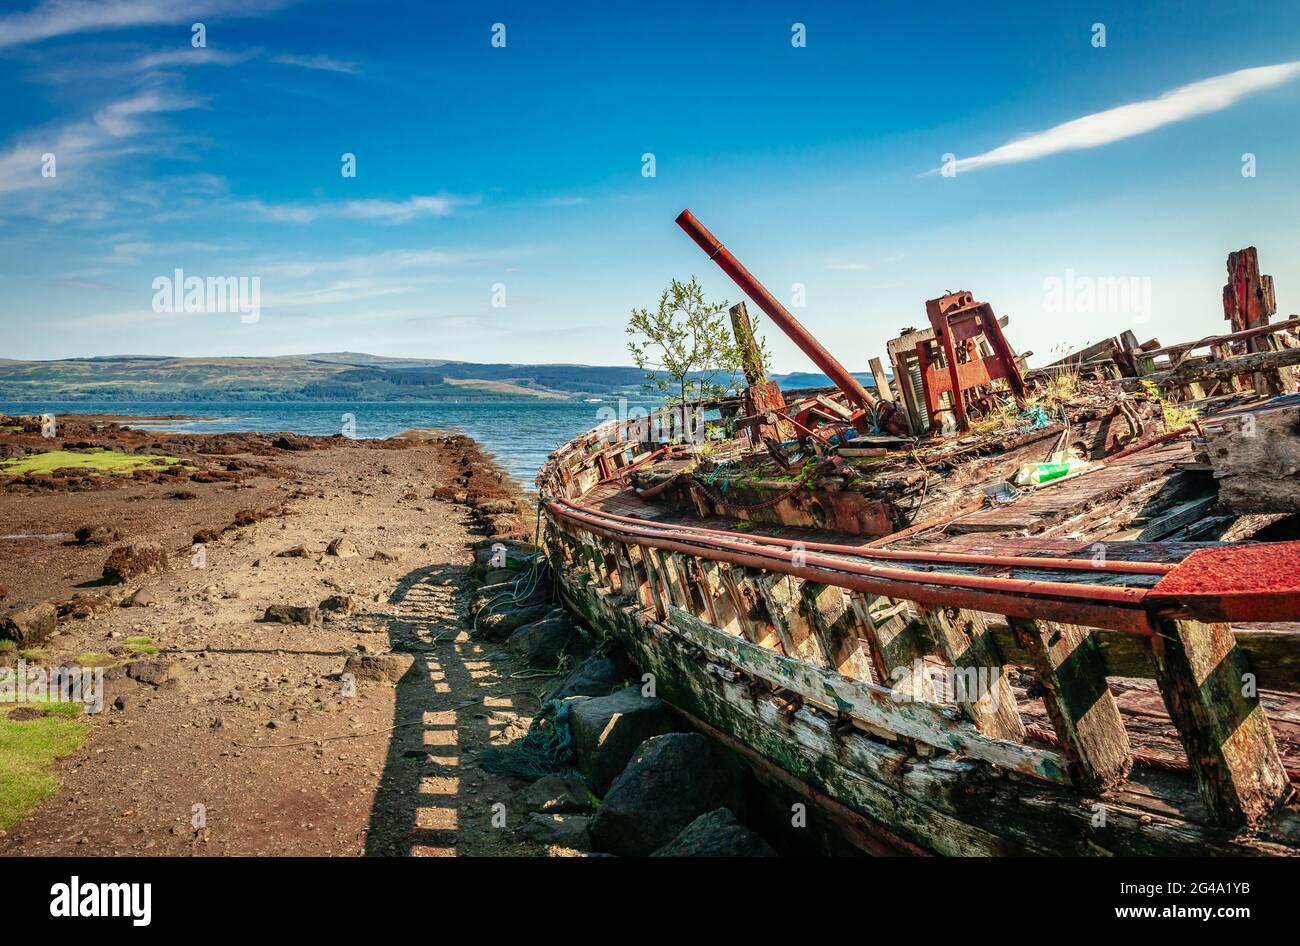 Fishing boat wrecks at Salen, on the Isle of Mull. The Sound of Mull is in the background.  Scotland, August 2019. Stock Photo